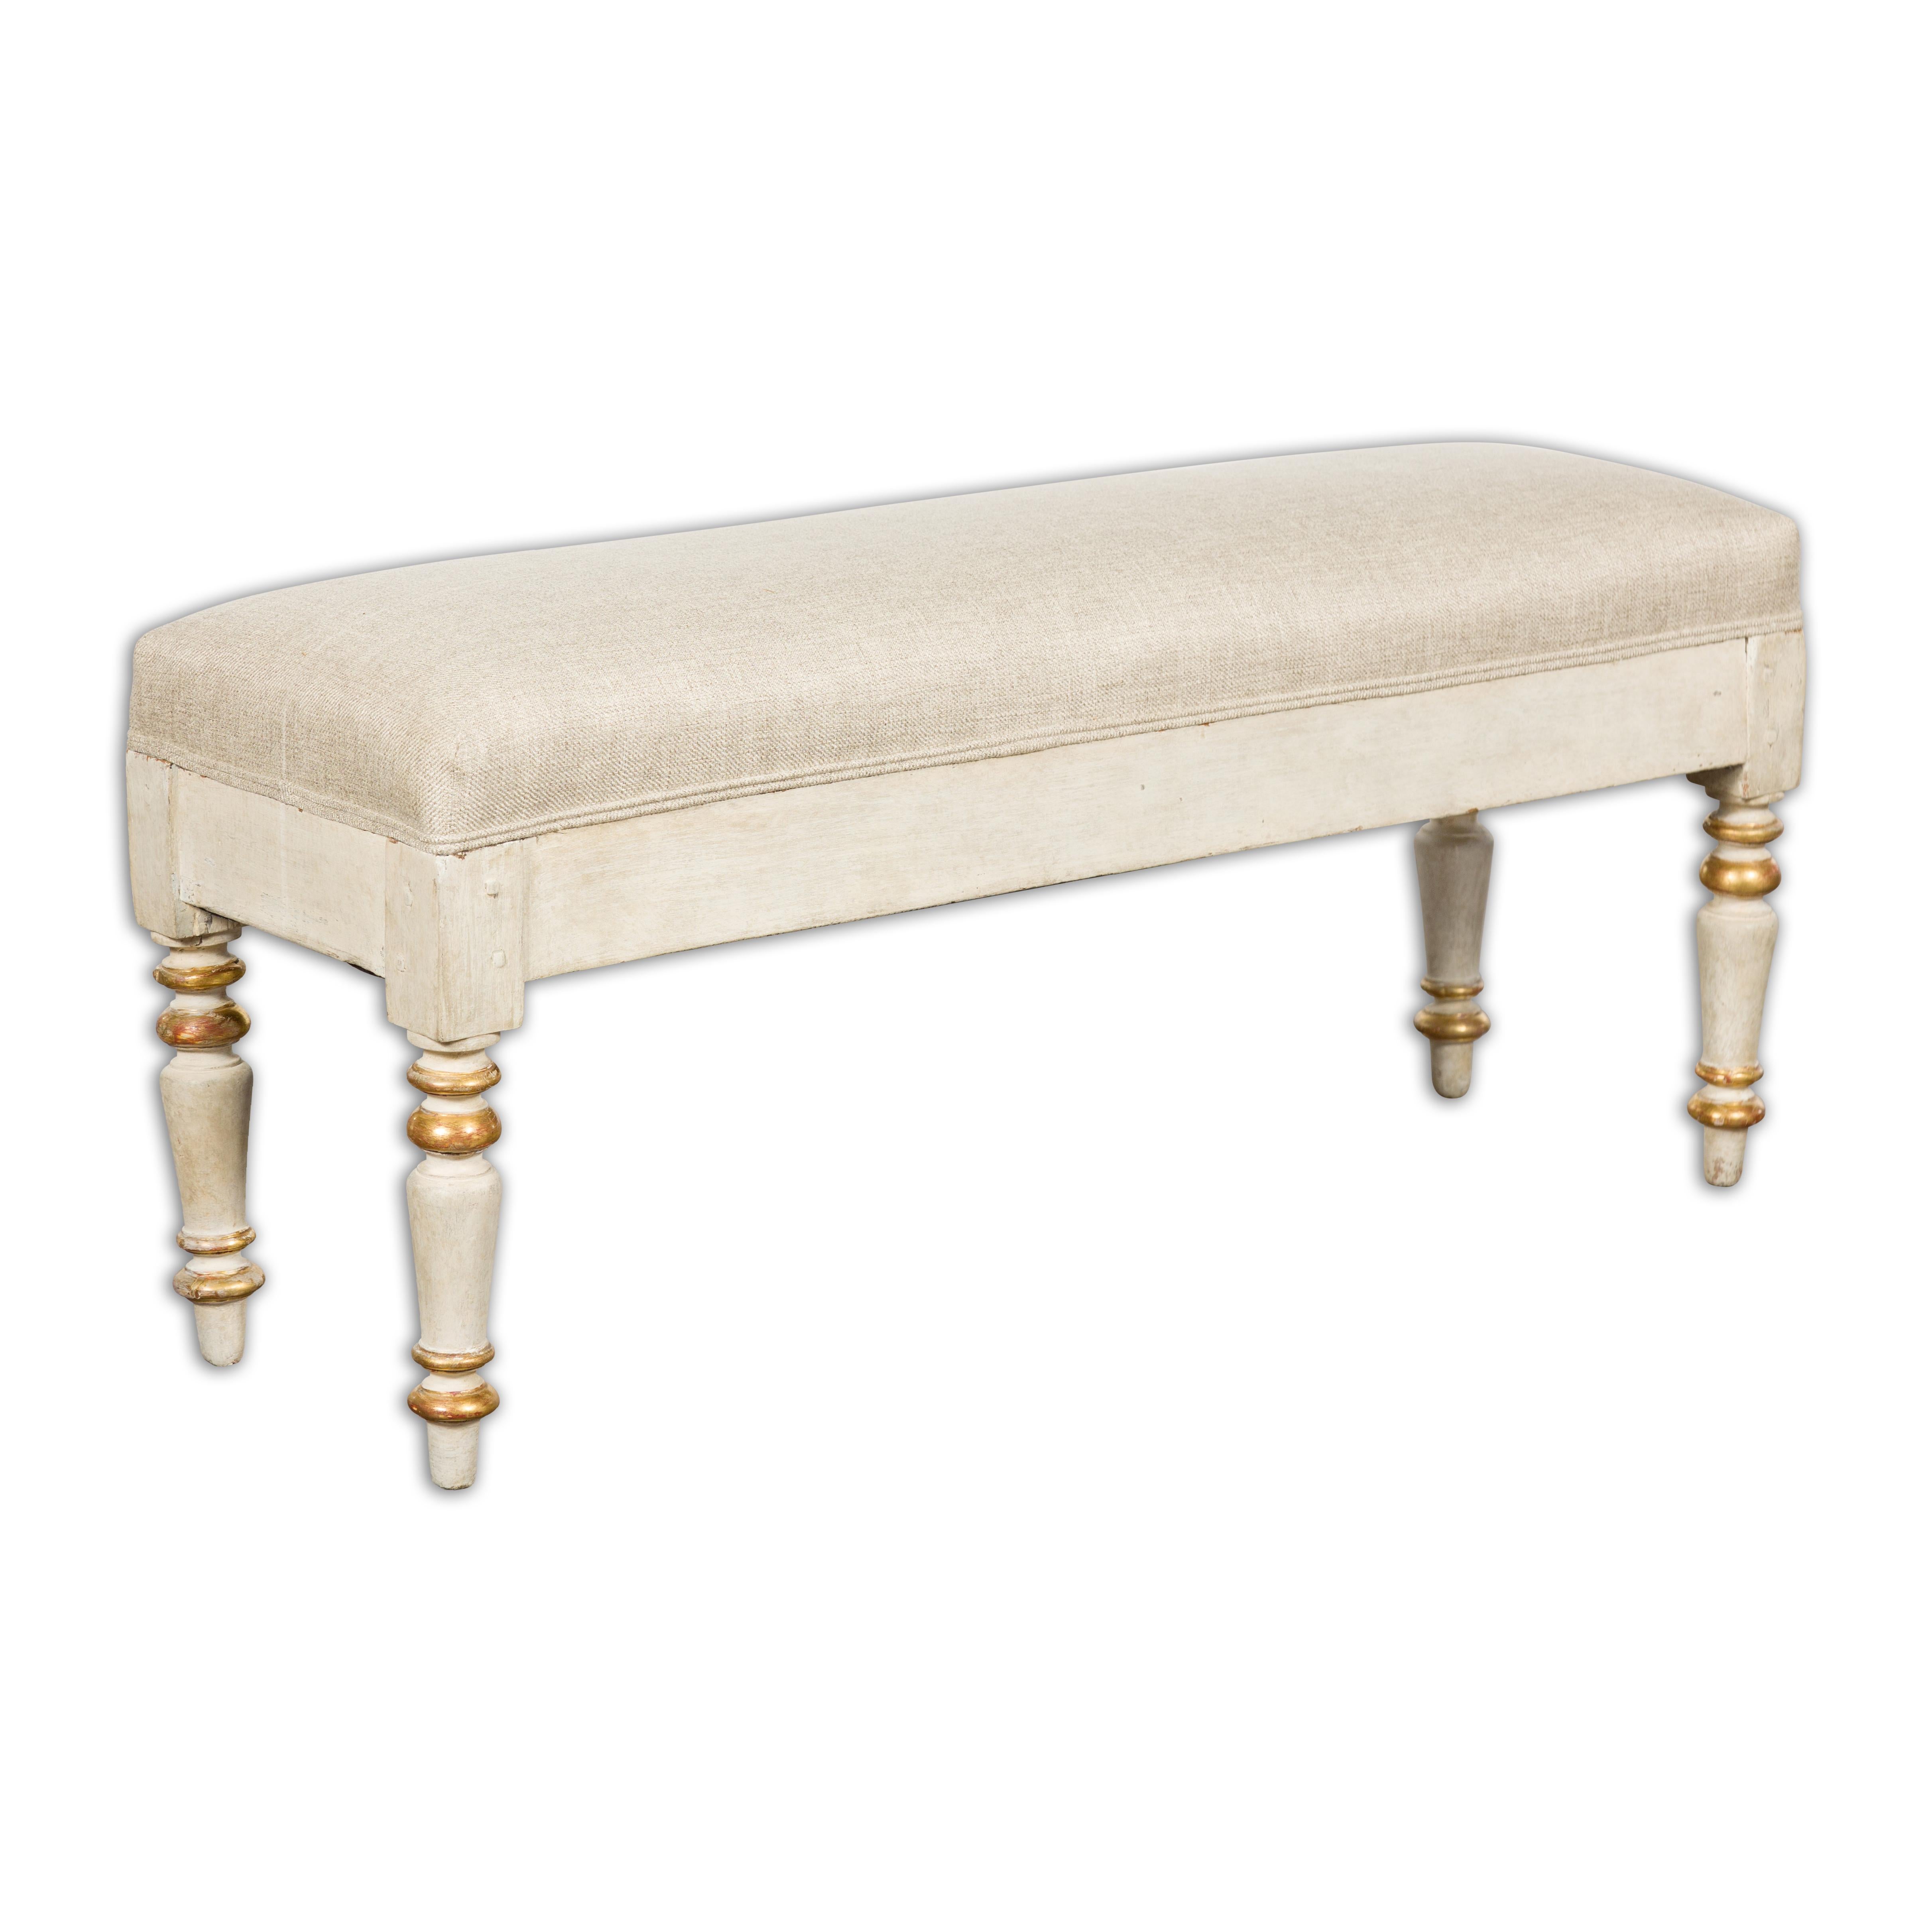 19th Century French Painted and Gilded Bench with Turned Legs and Upholstery For Sale 11